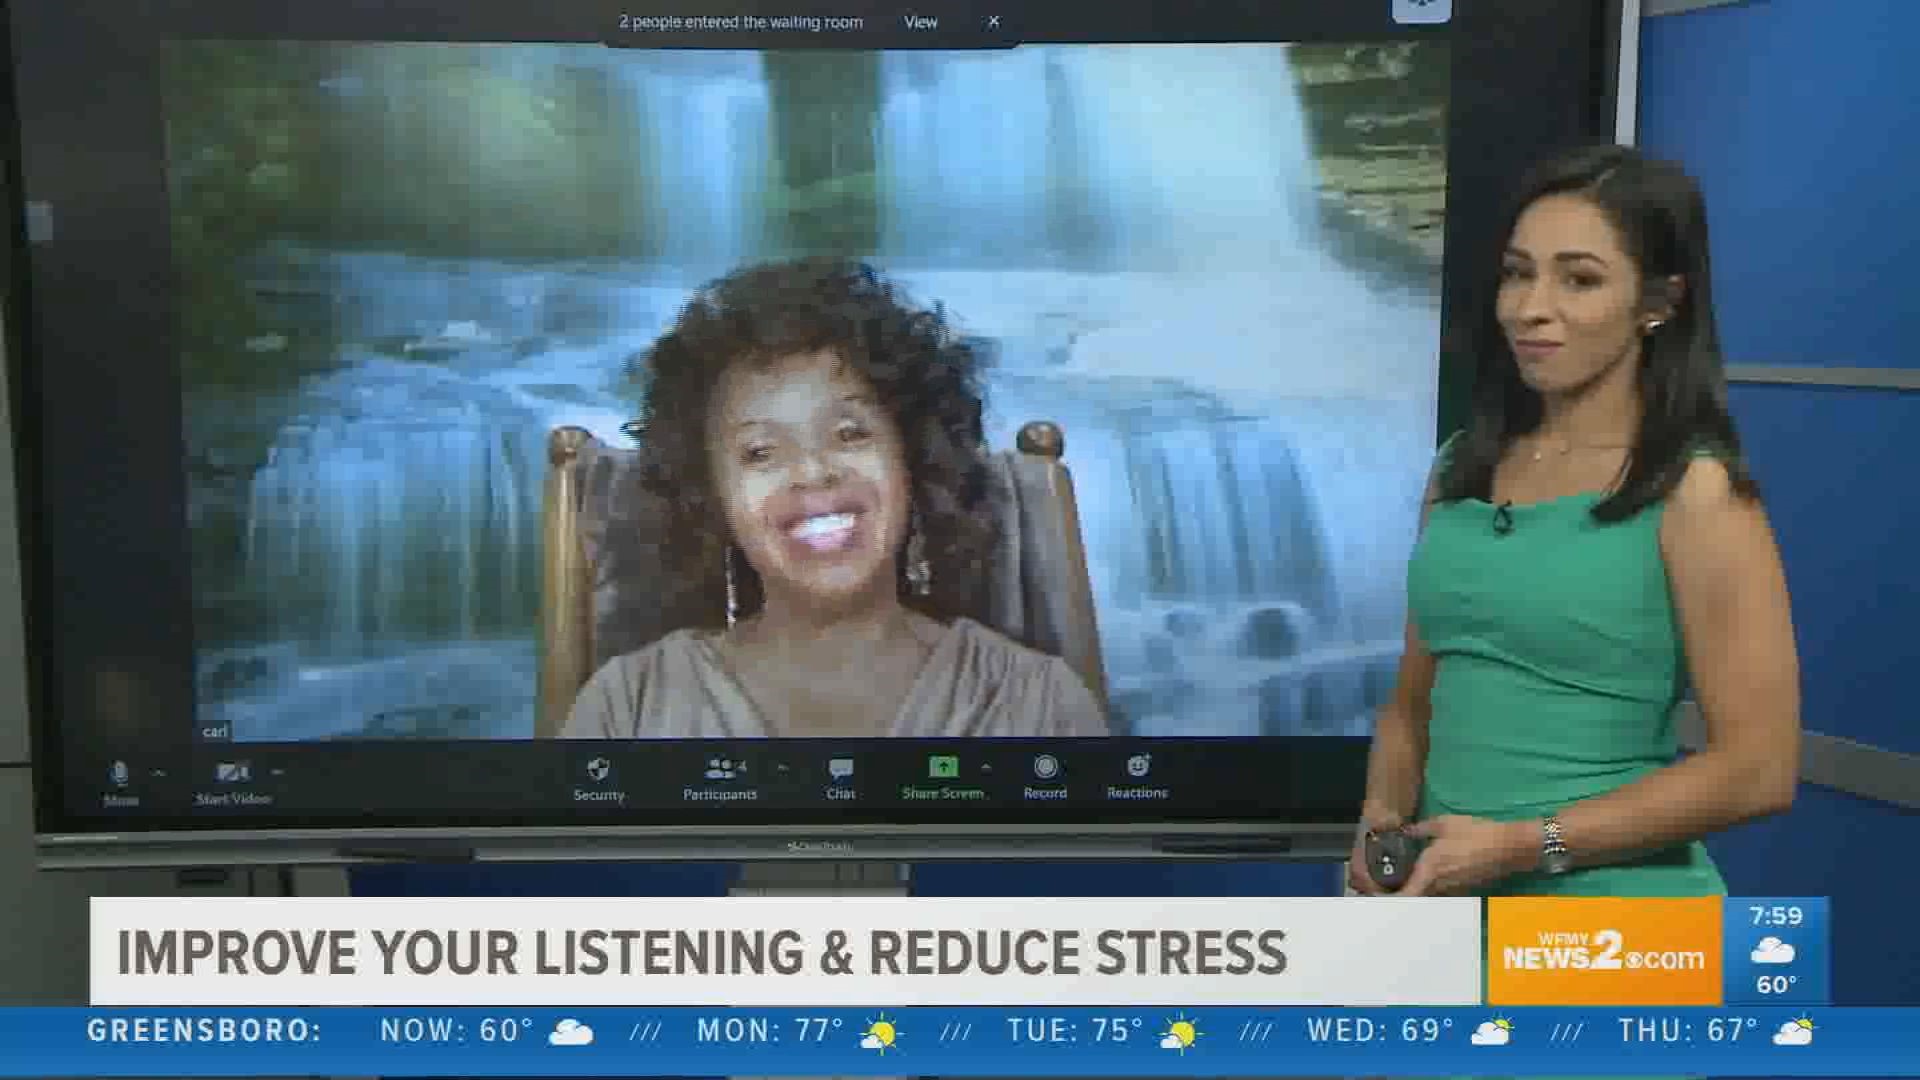 Listening is a skill that will reduce stress in a relationship. Jill White-Huffman shares how to improve these skills.